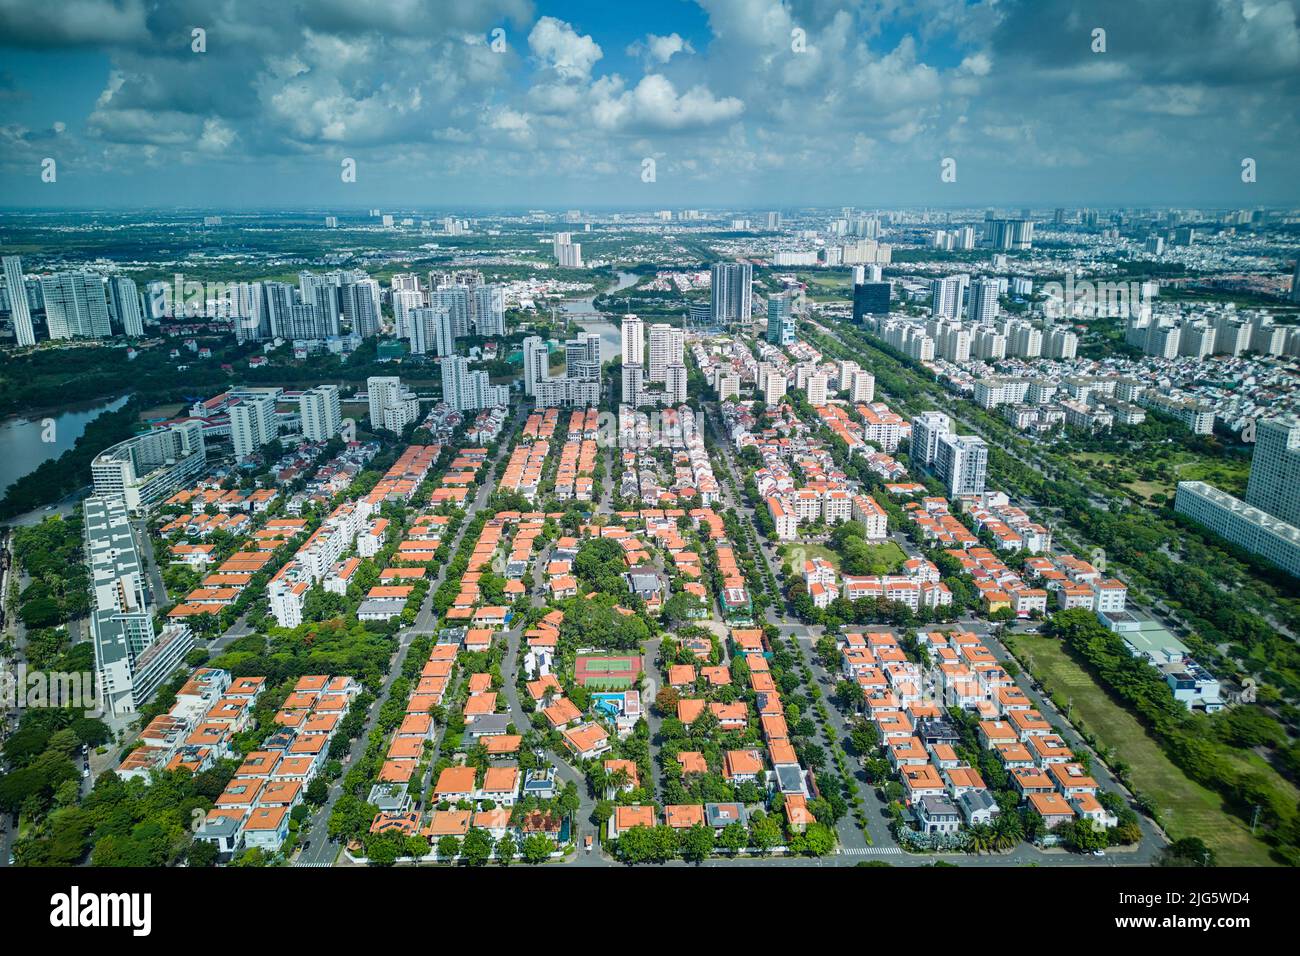 June 14, 2022: scene of Phu My Hung residential area, district 7, Ho Chi Minh city, Vietnam Stock Photo